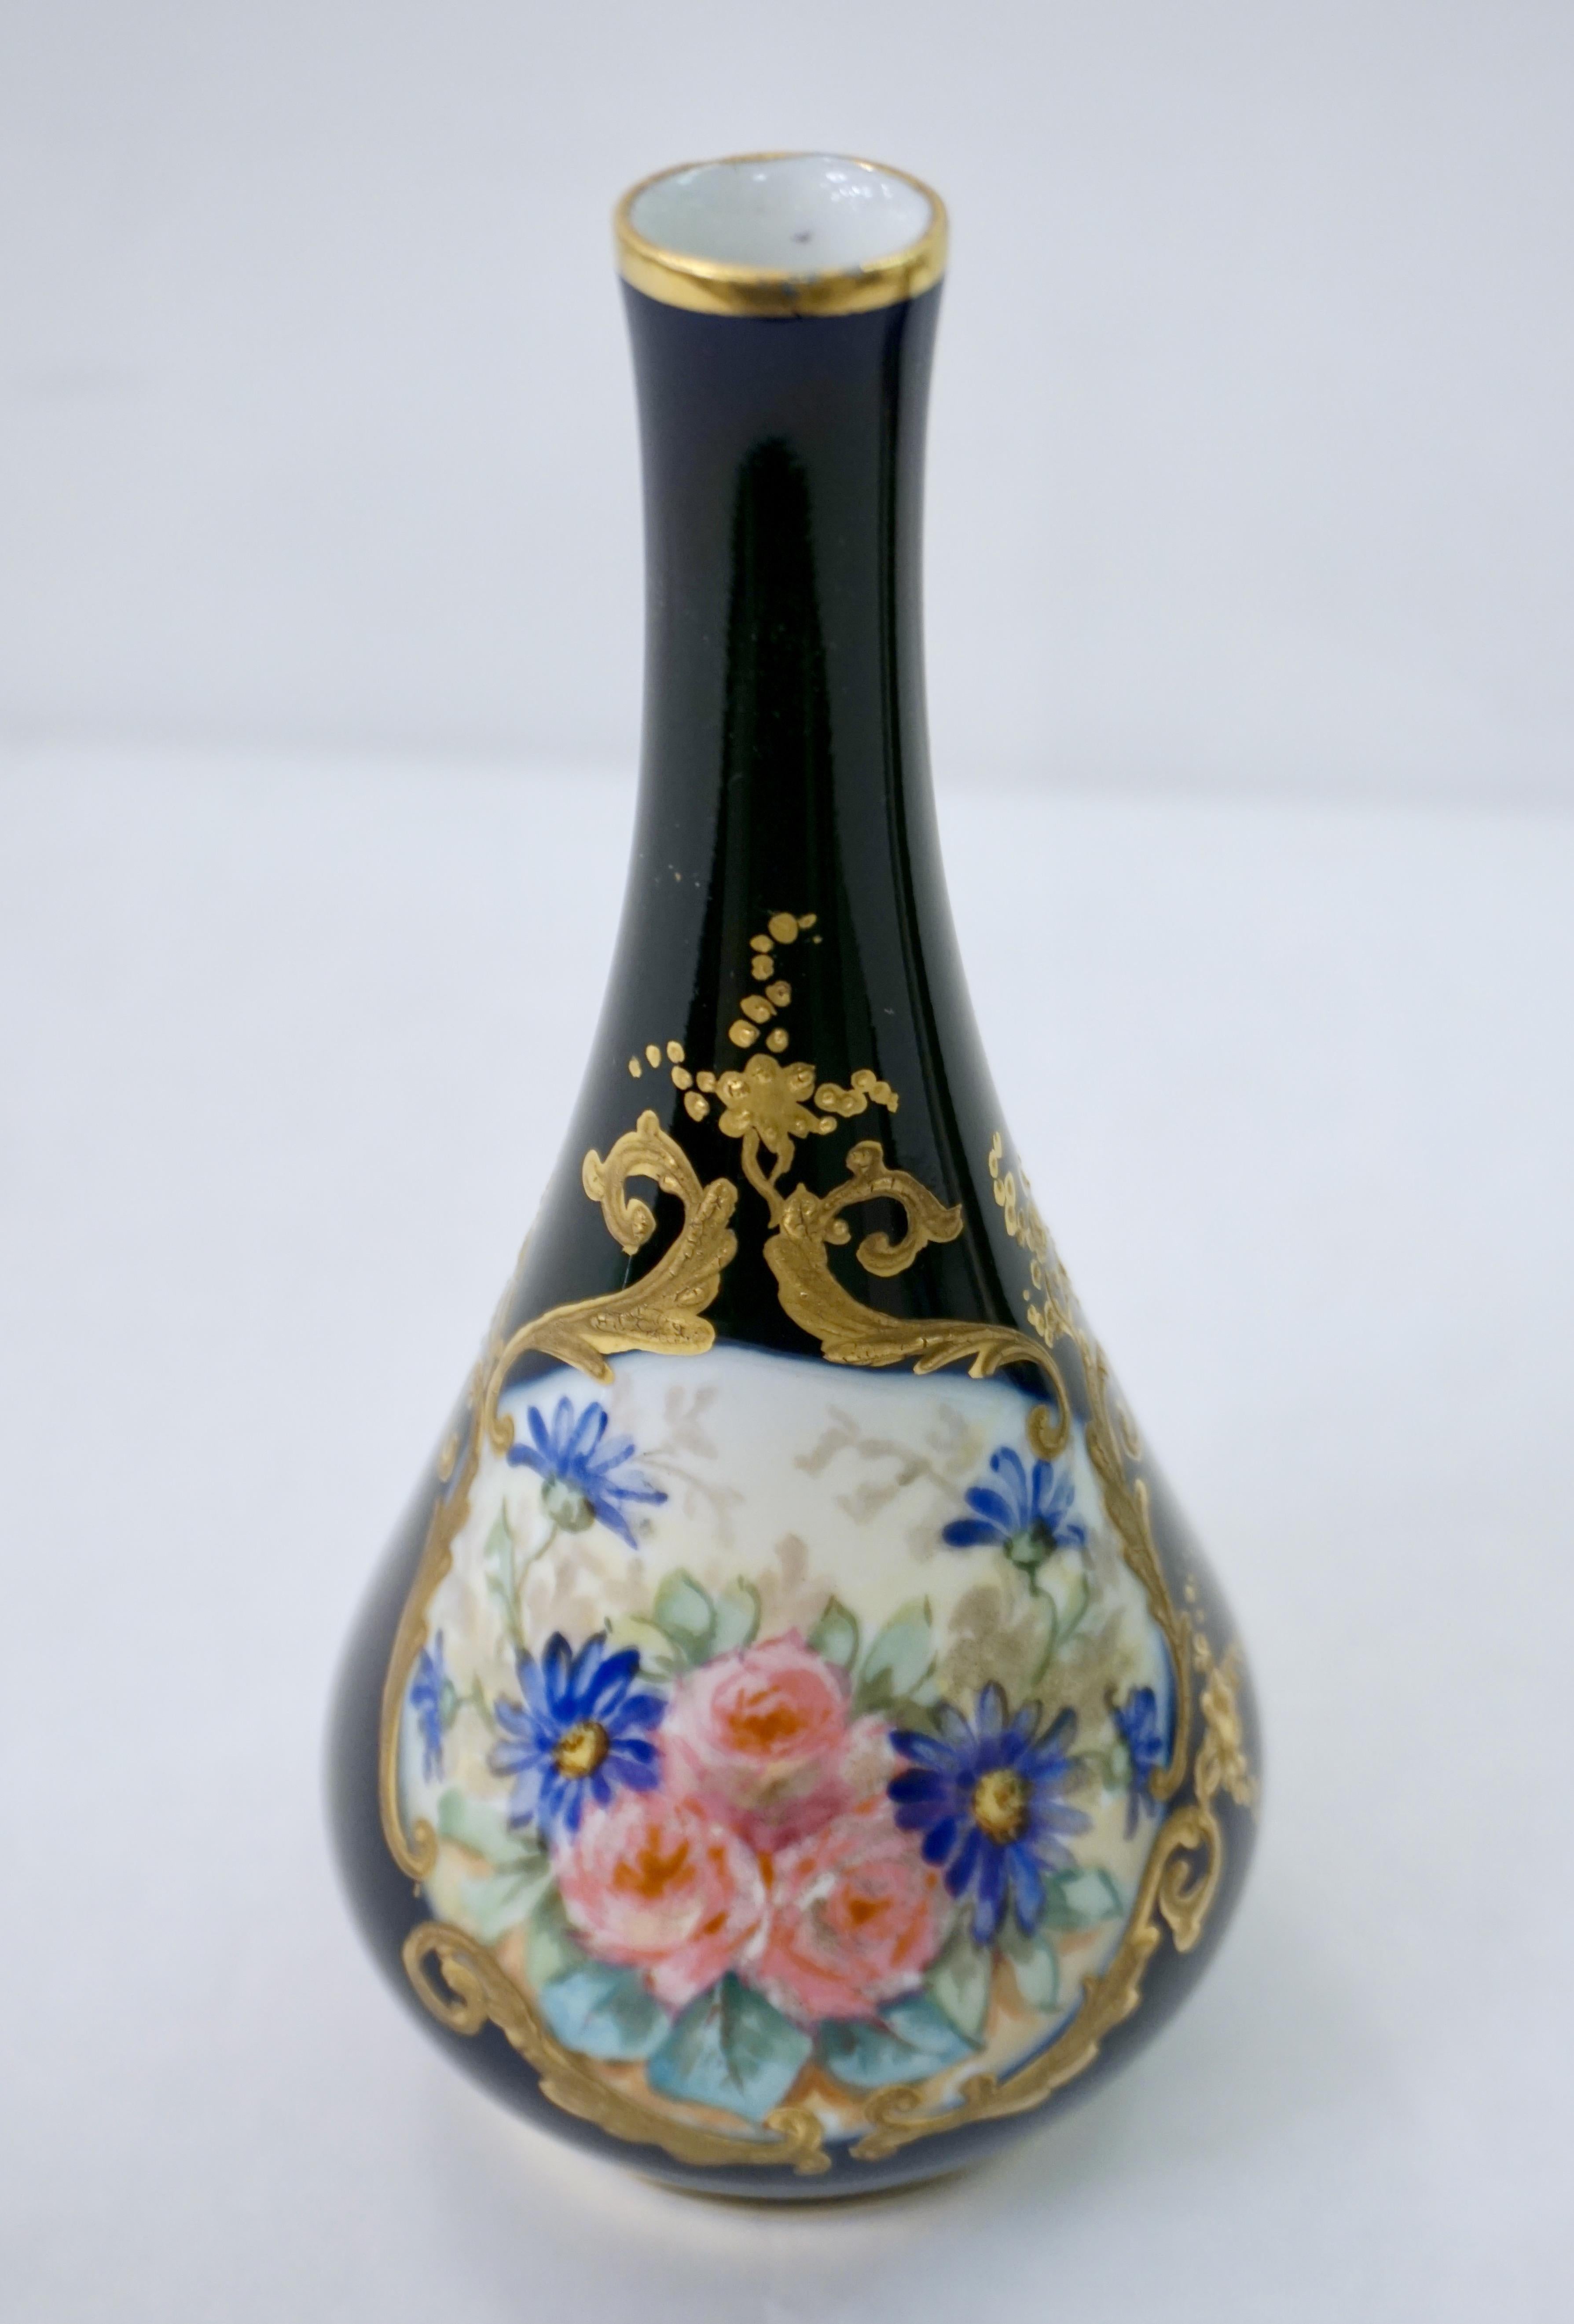 Early 20th century, French pair of small vases in Limoges porcelain, decorated each with a different front cameo hand painted with polychrome aqua blue, green, pink flowers on white background, with enamel relief accents painted in rich gold against